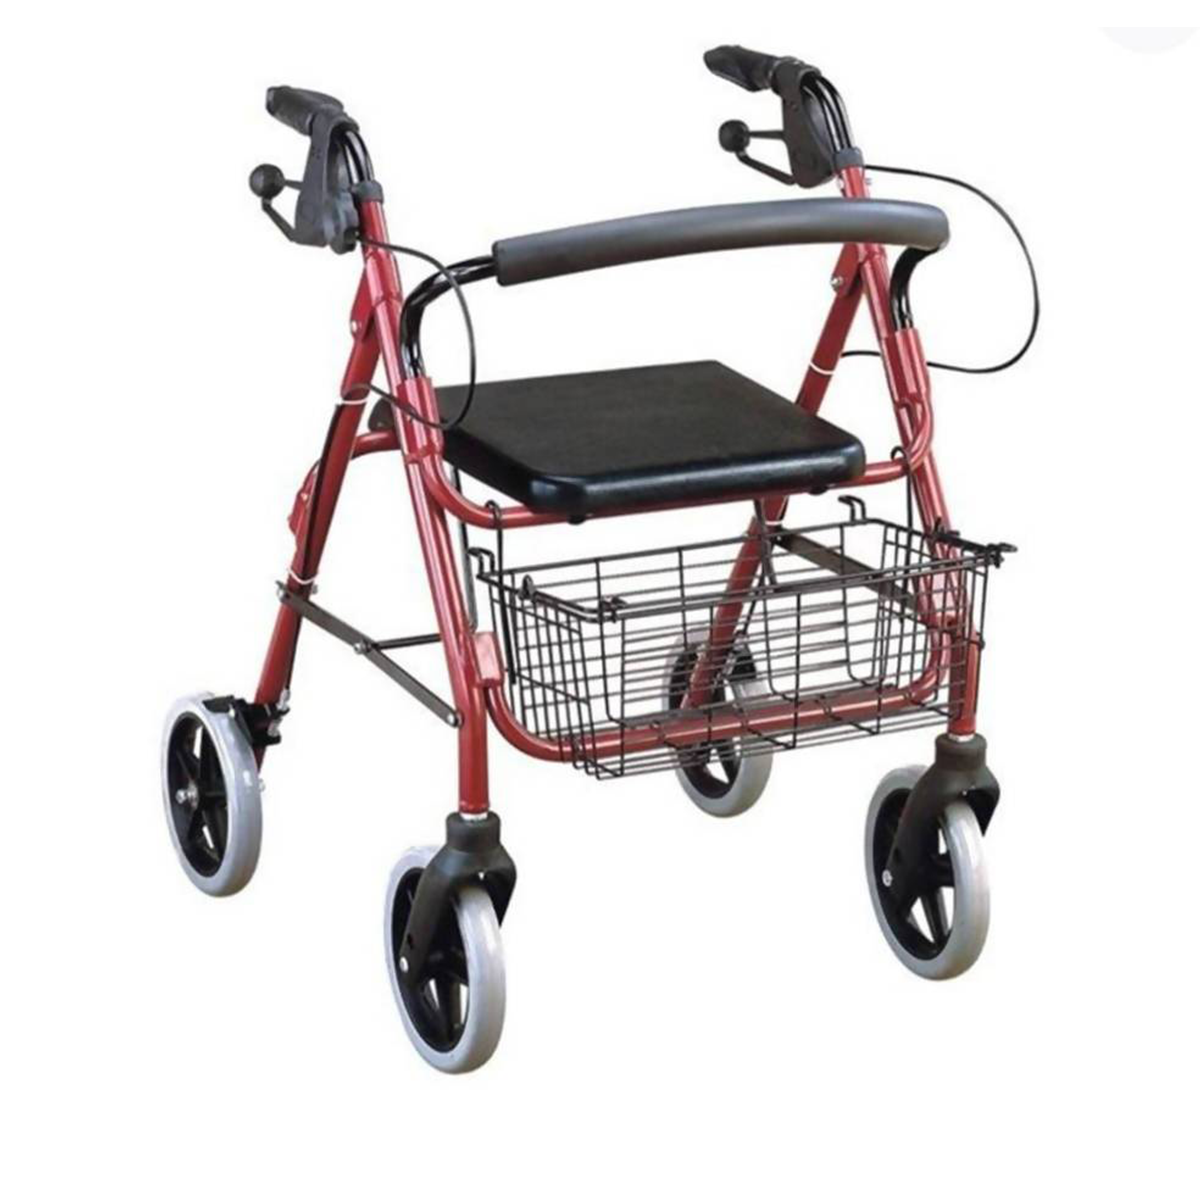 Rolator with seat and shopping Basket